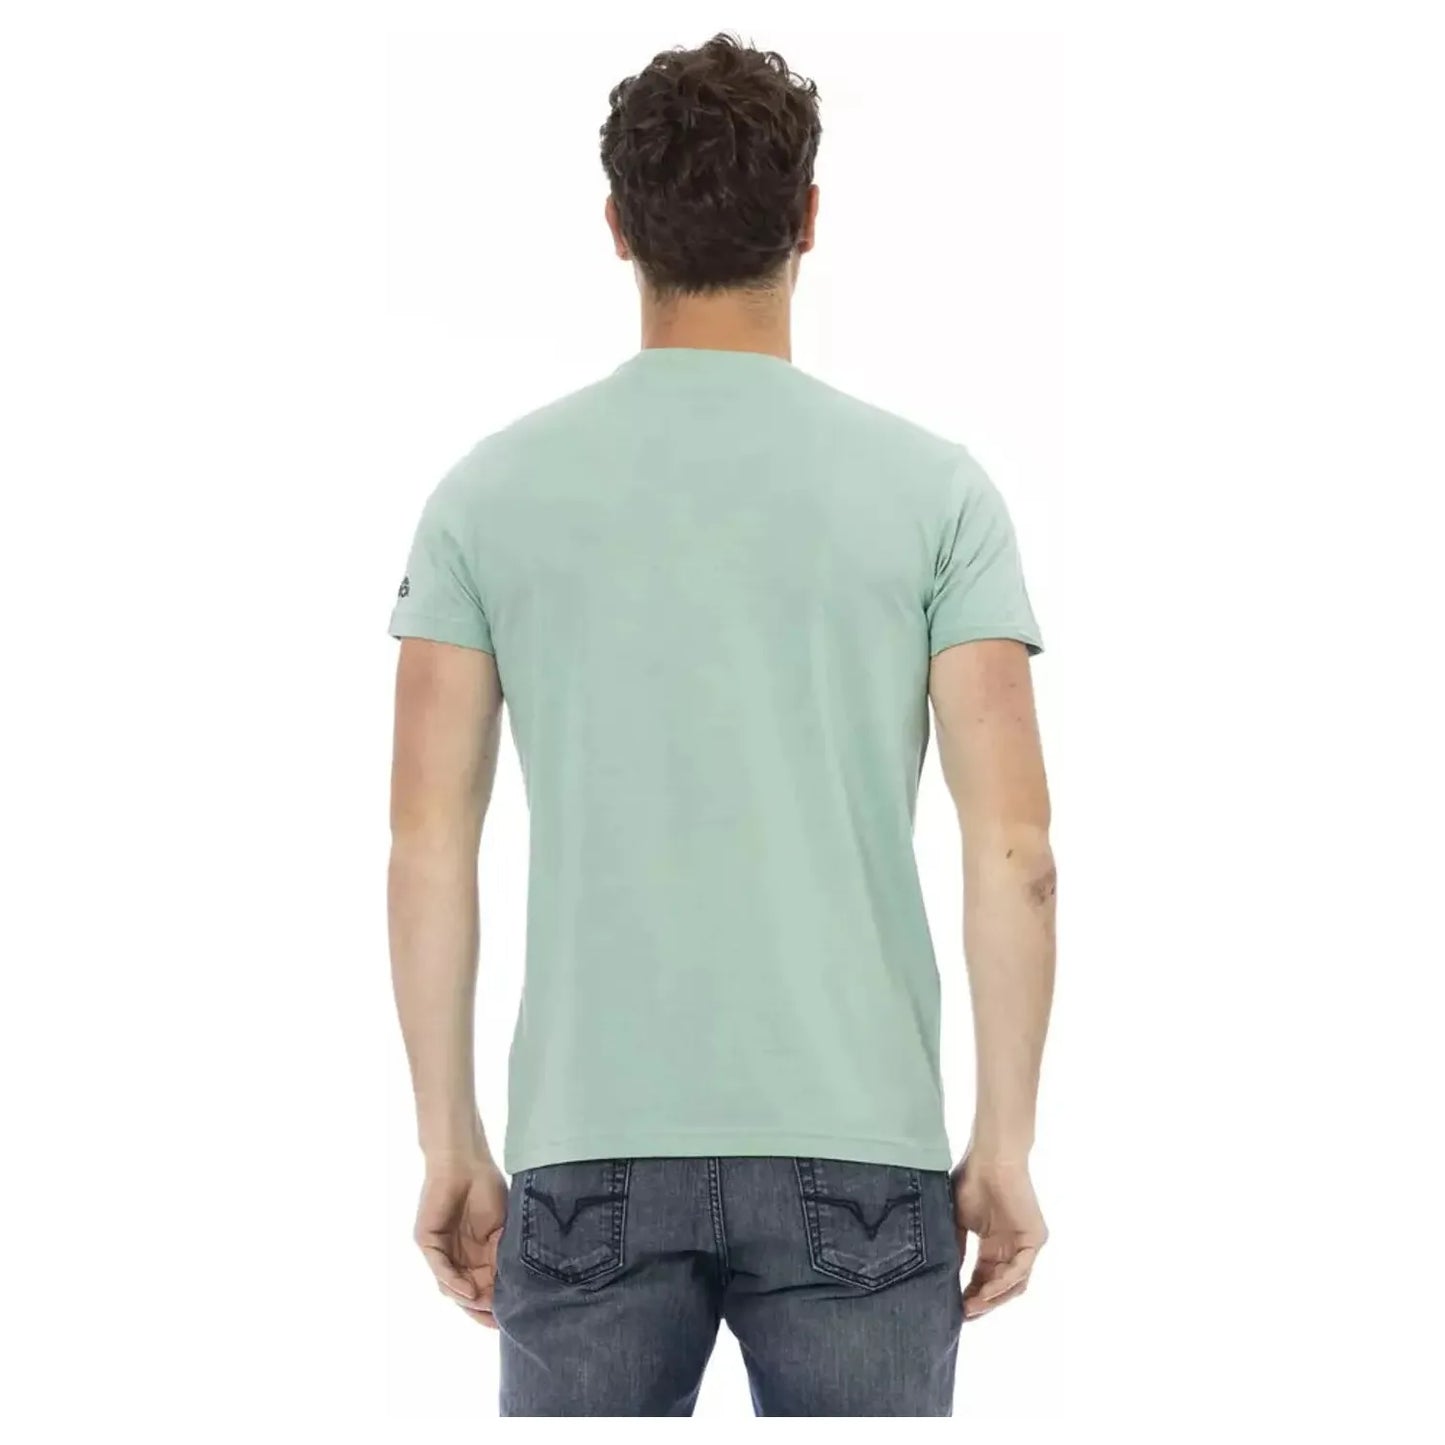 Trussardi Action Casual Chic Green Tee with Graphic Appeal green-cotton-t-shirt-53